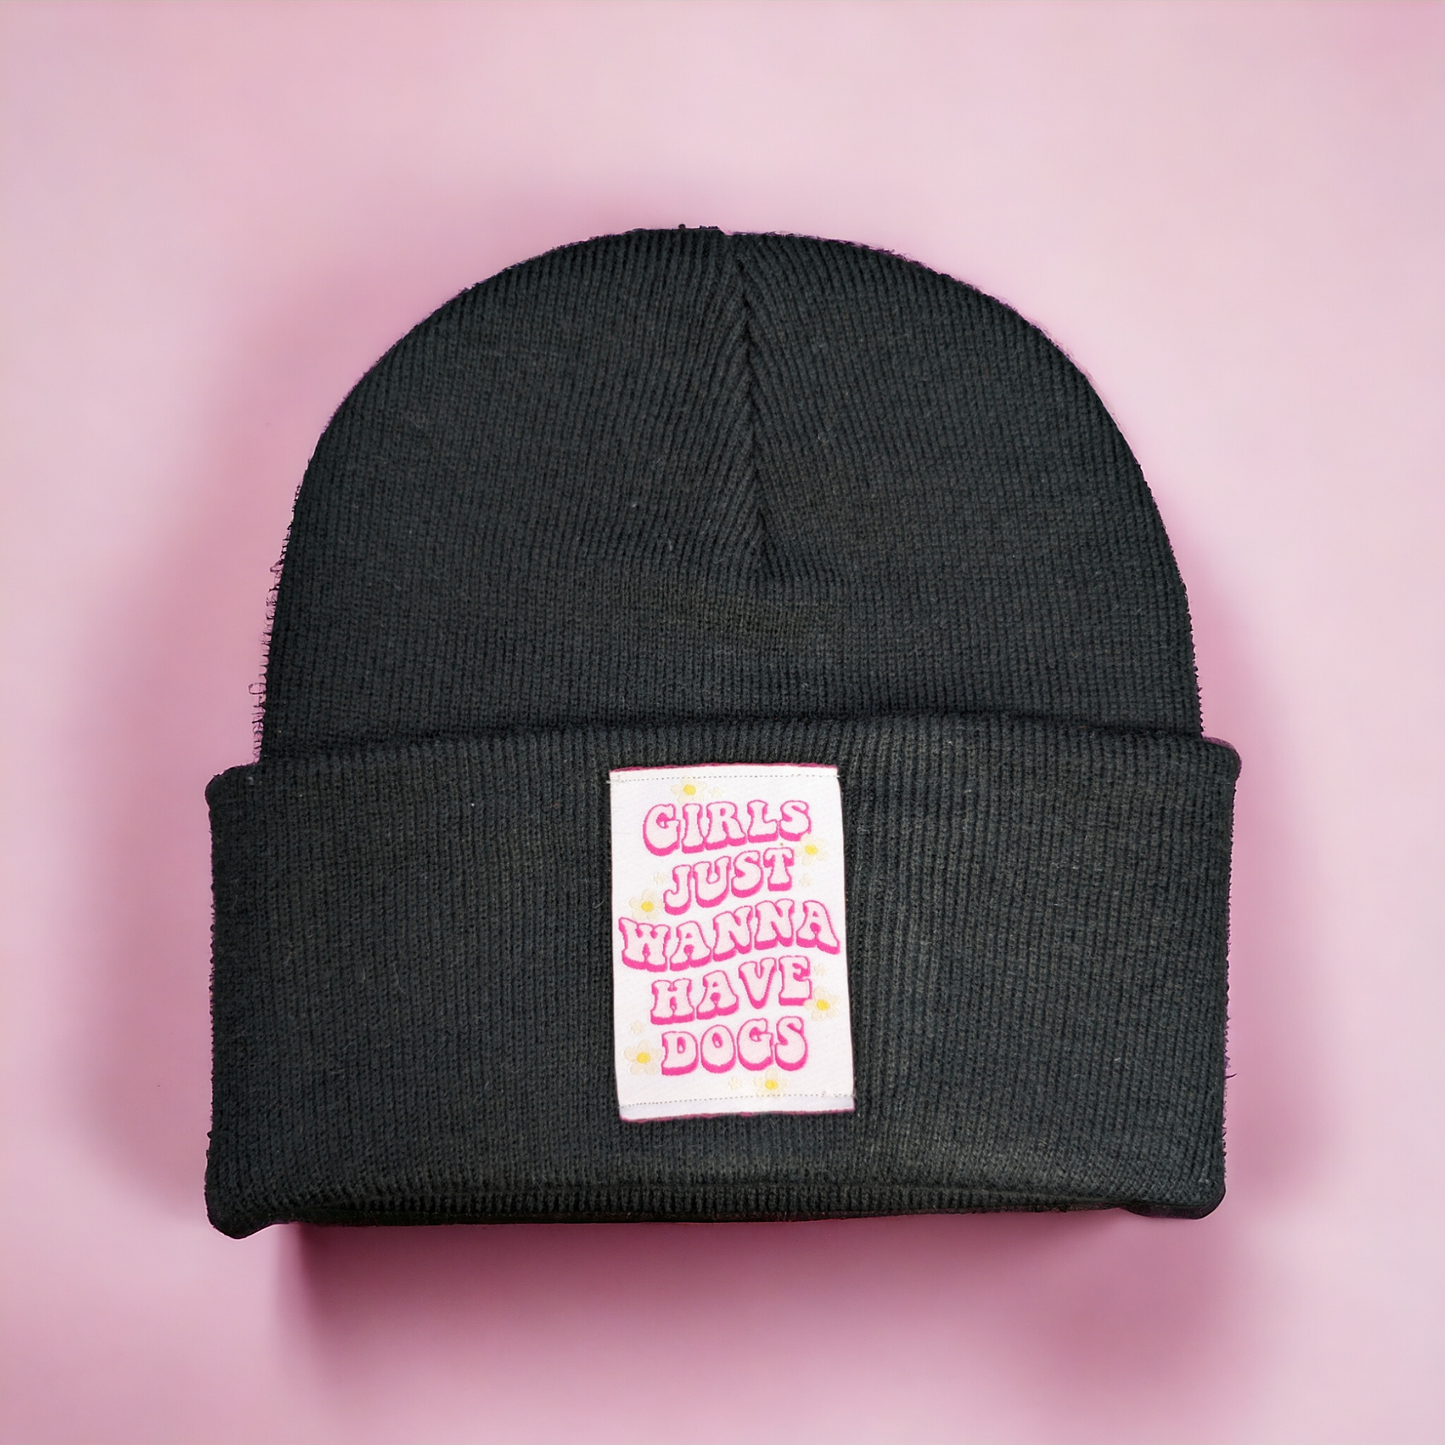 Girls Just Wanna Have Dogs Beanie